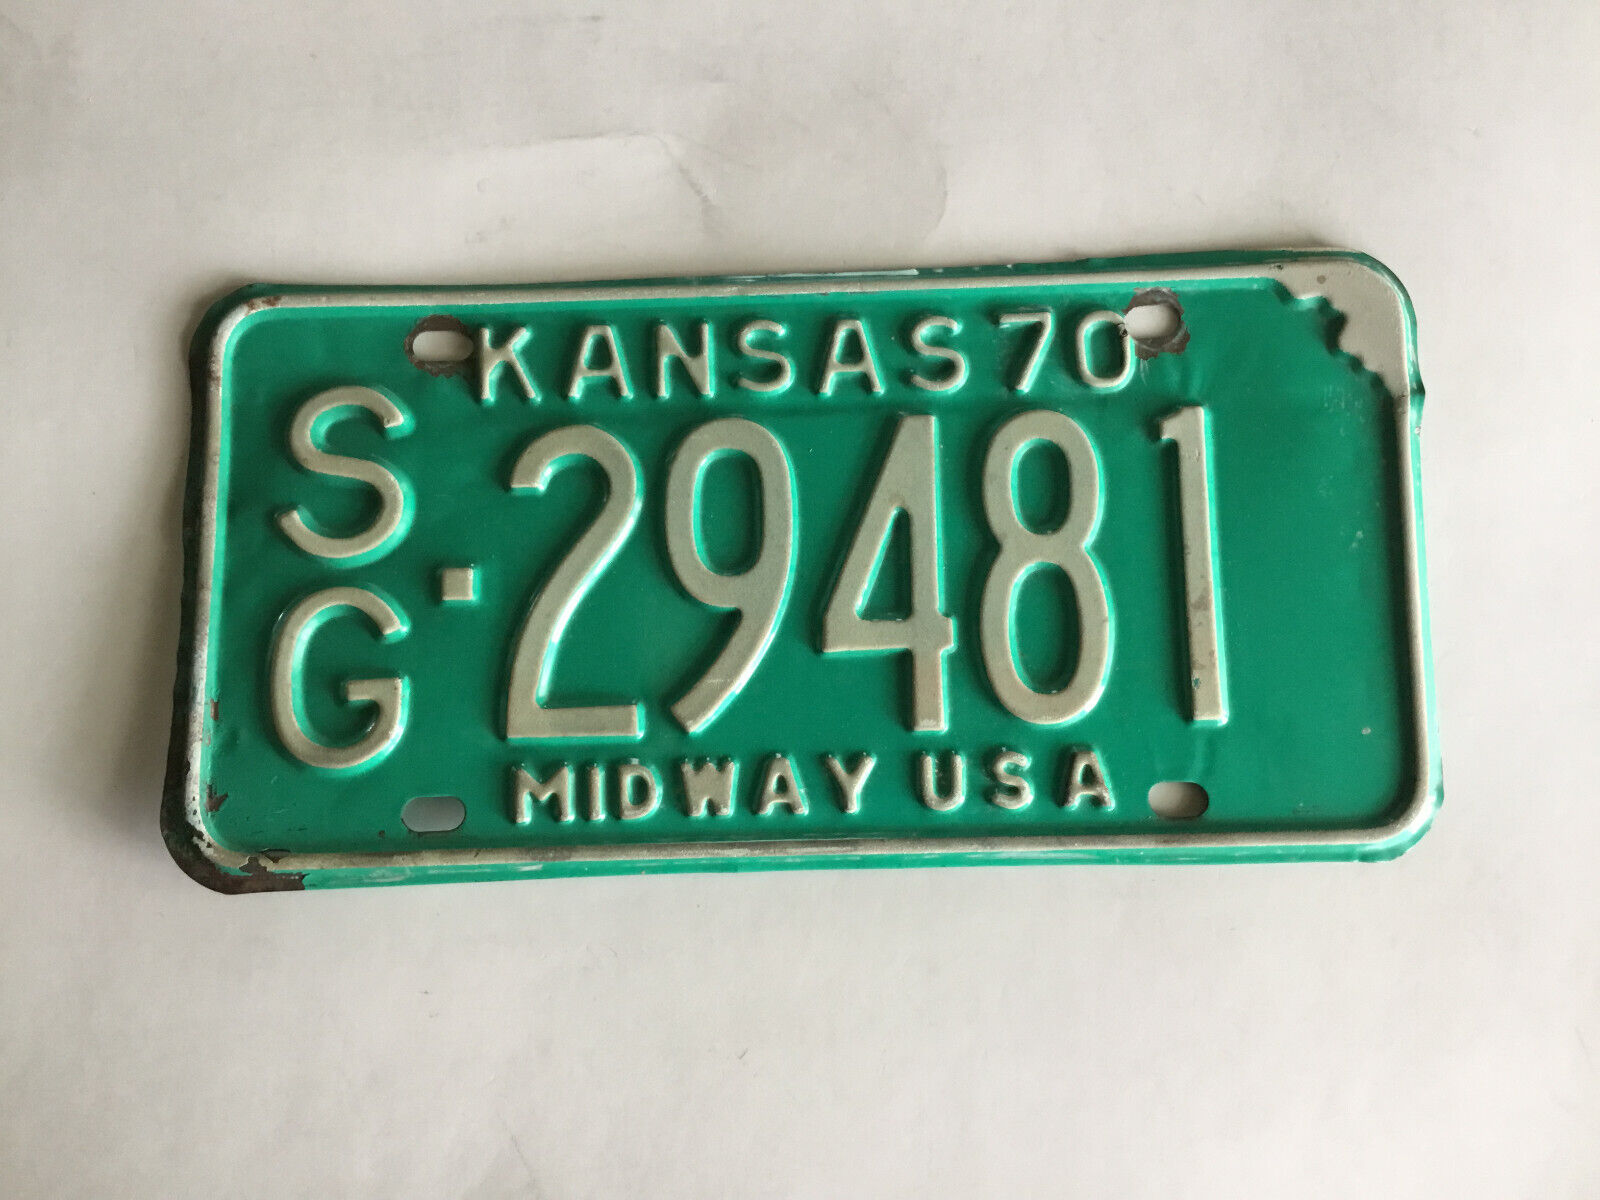 1970 Kansas License Plate SG-29481, Midway USA, Nice, Vintage & Authentic